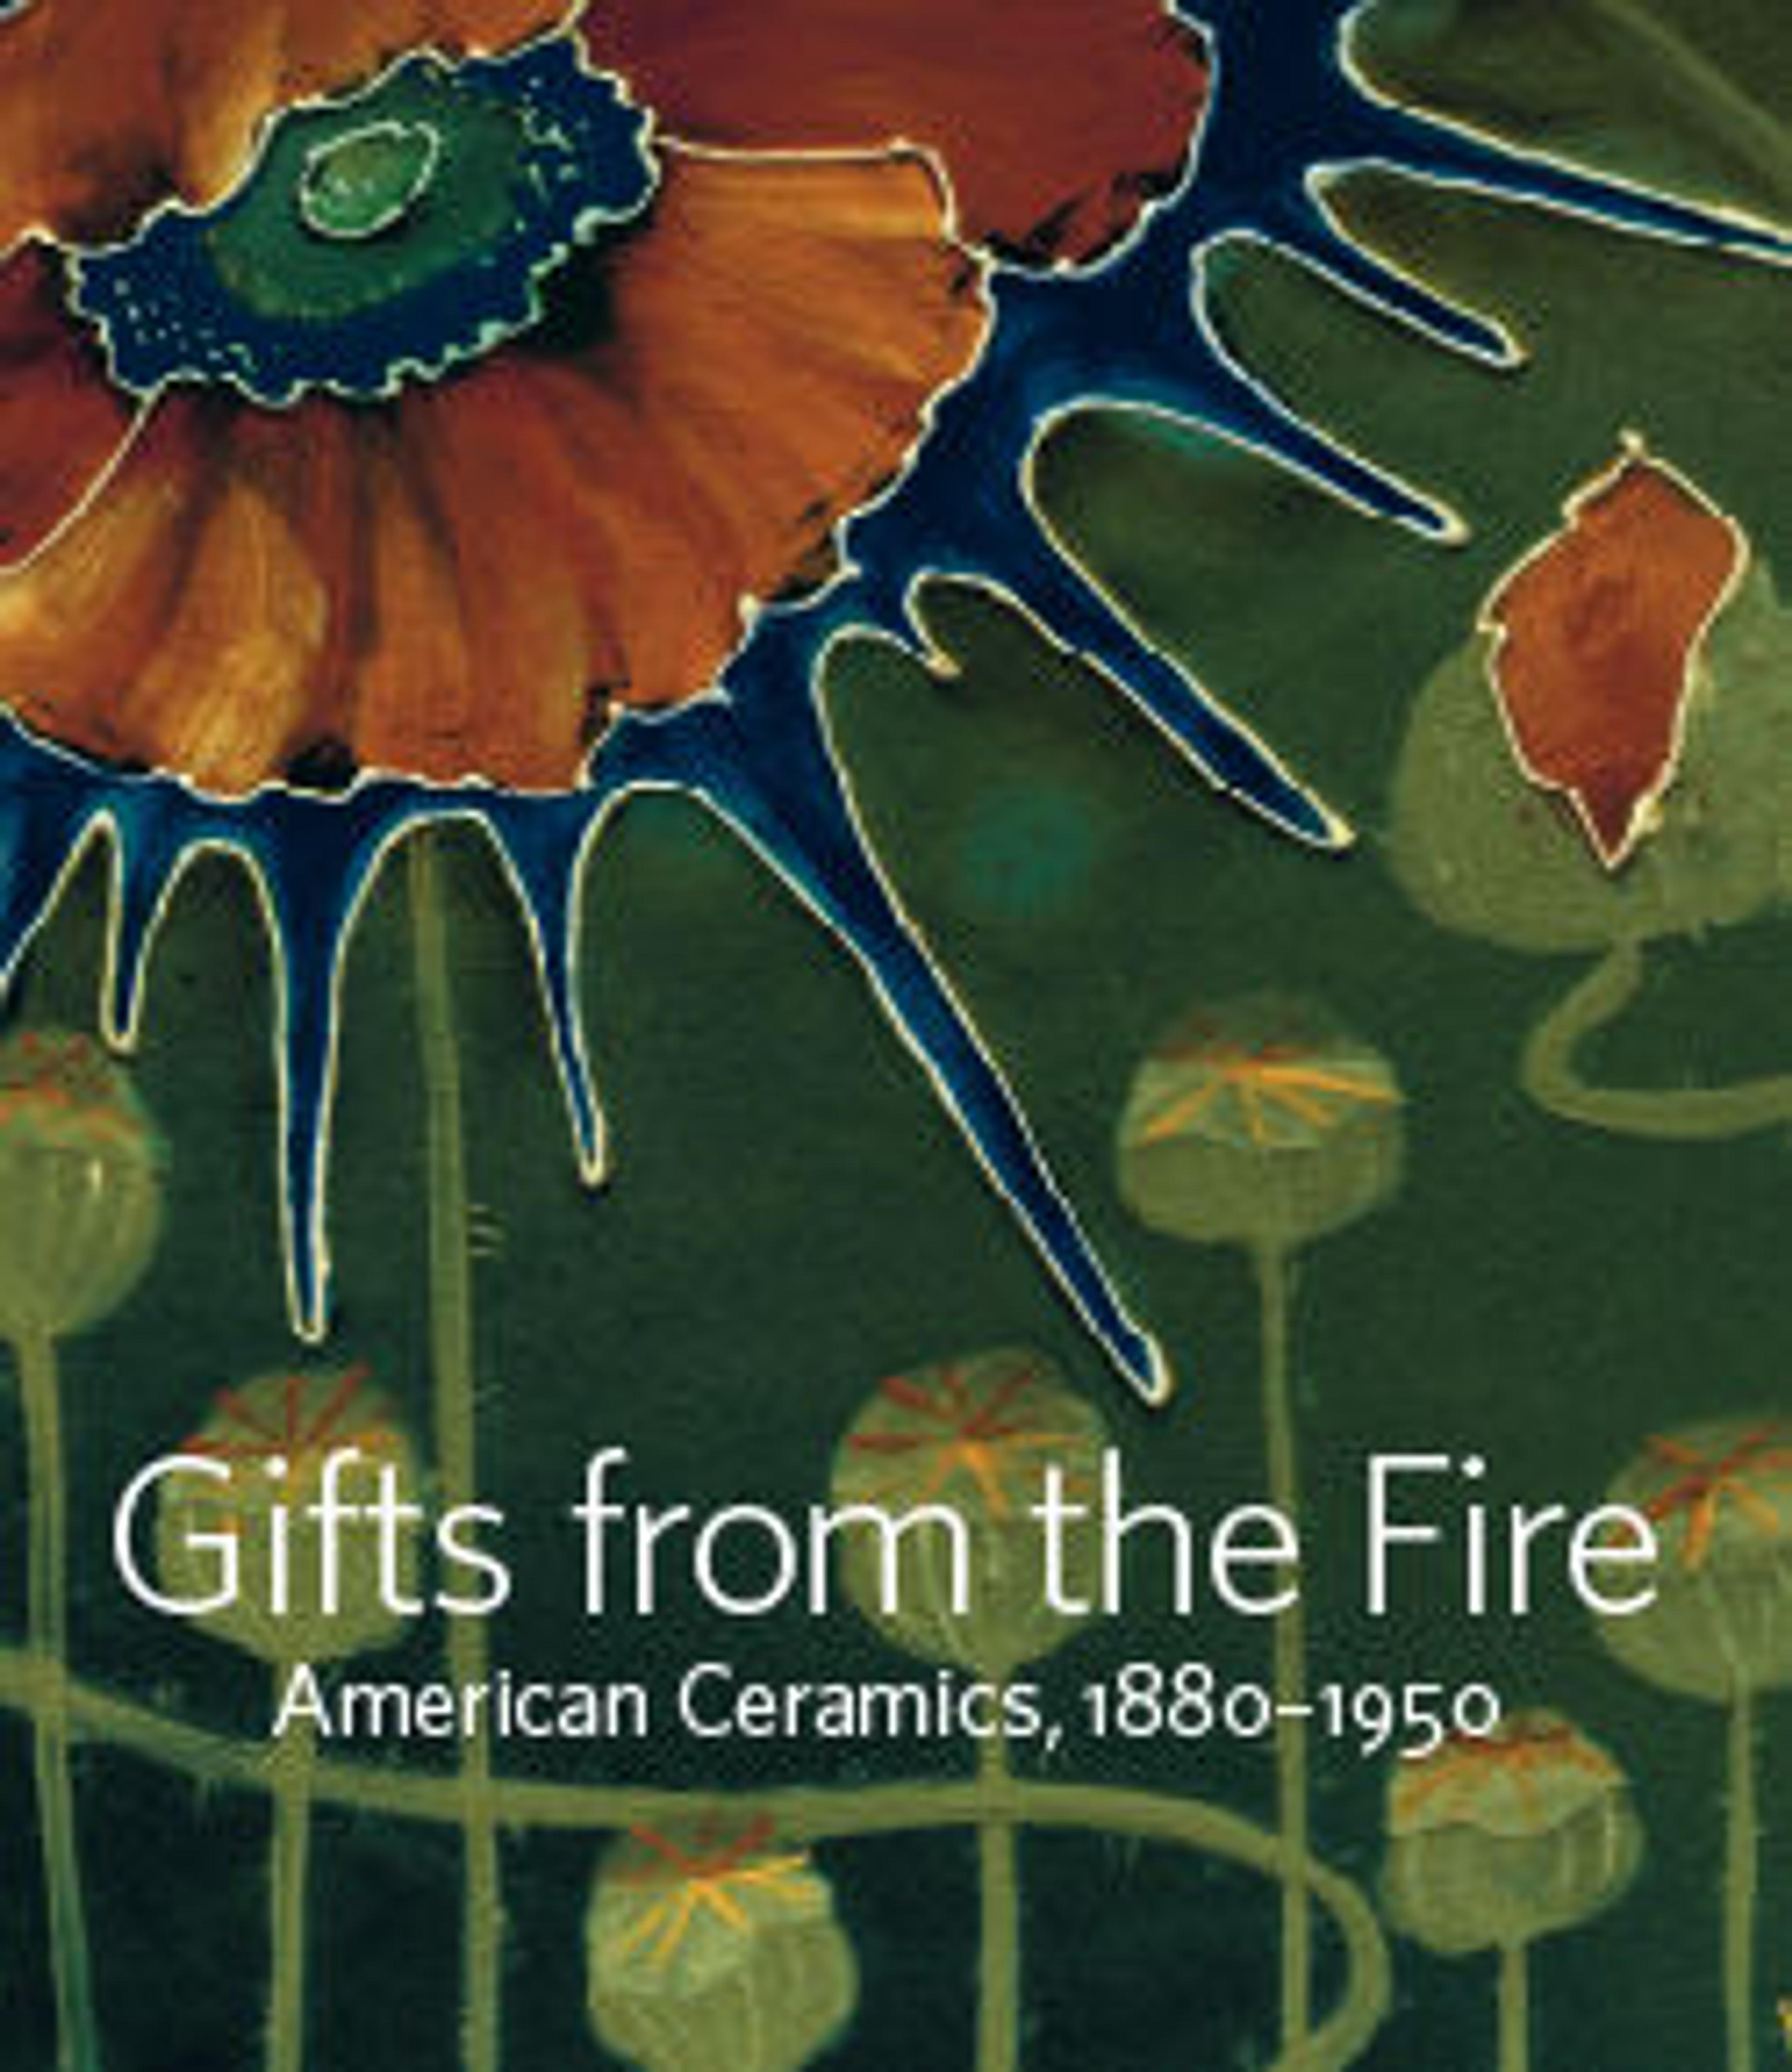 a colorful ceramic pattern of poppies, the cover to the book "Gifts from the Fire, American Ceramics 1880–1950"